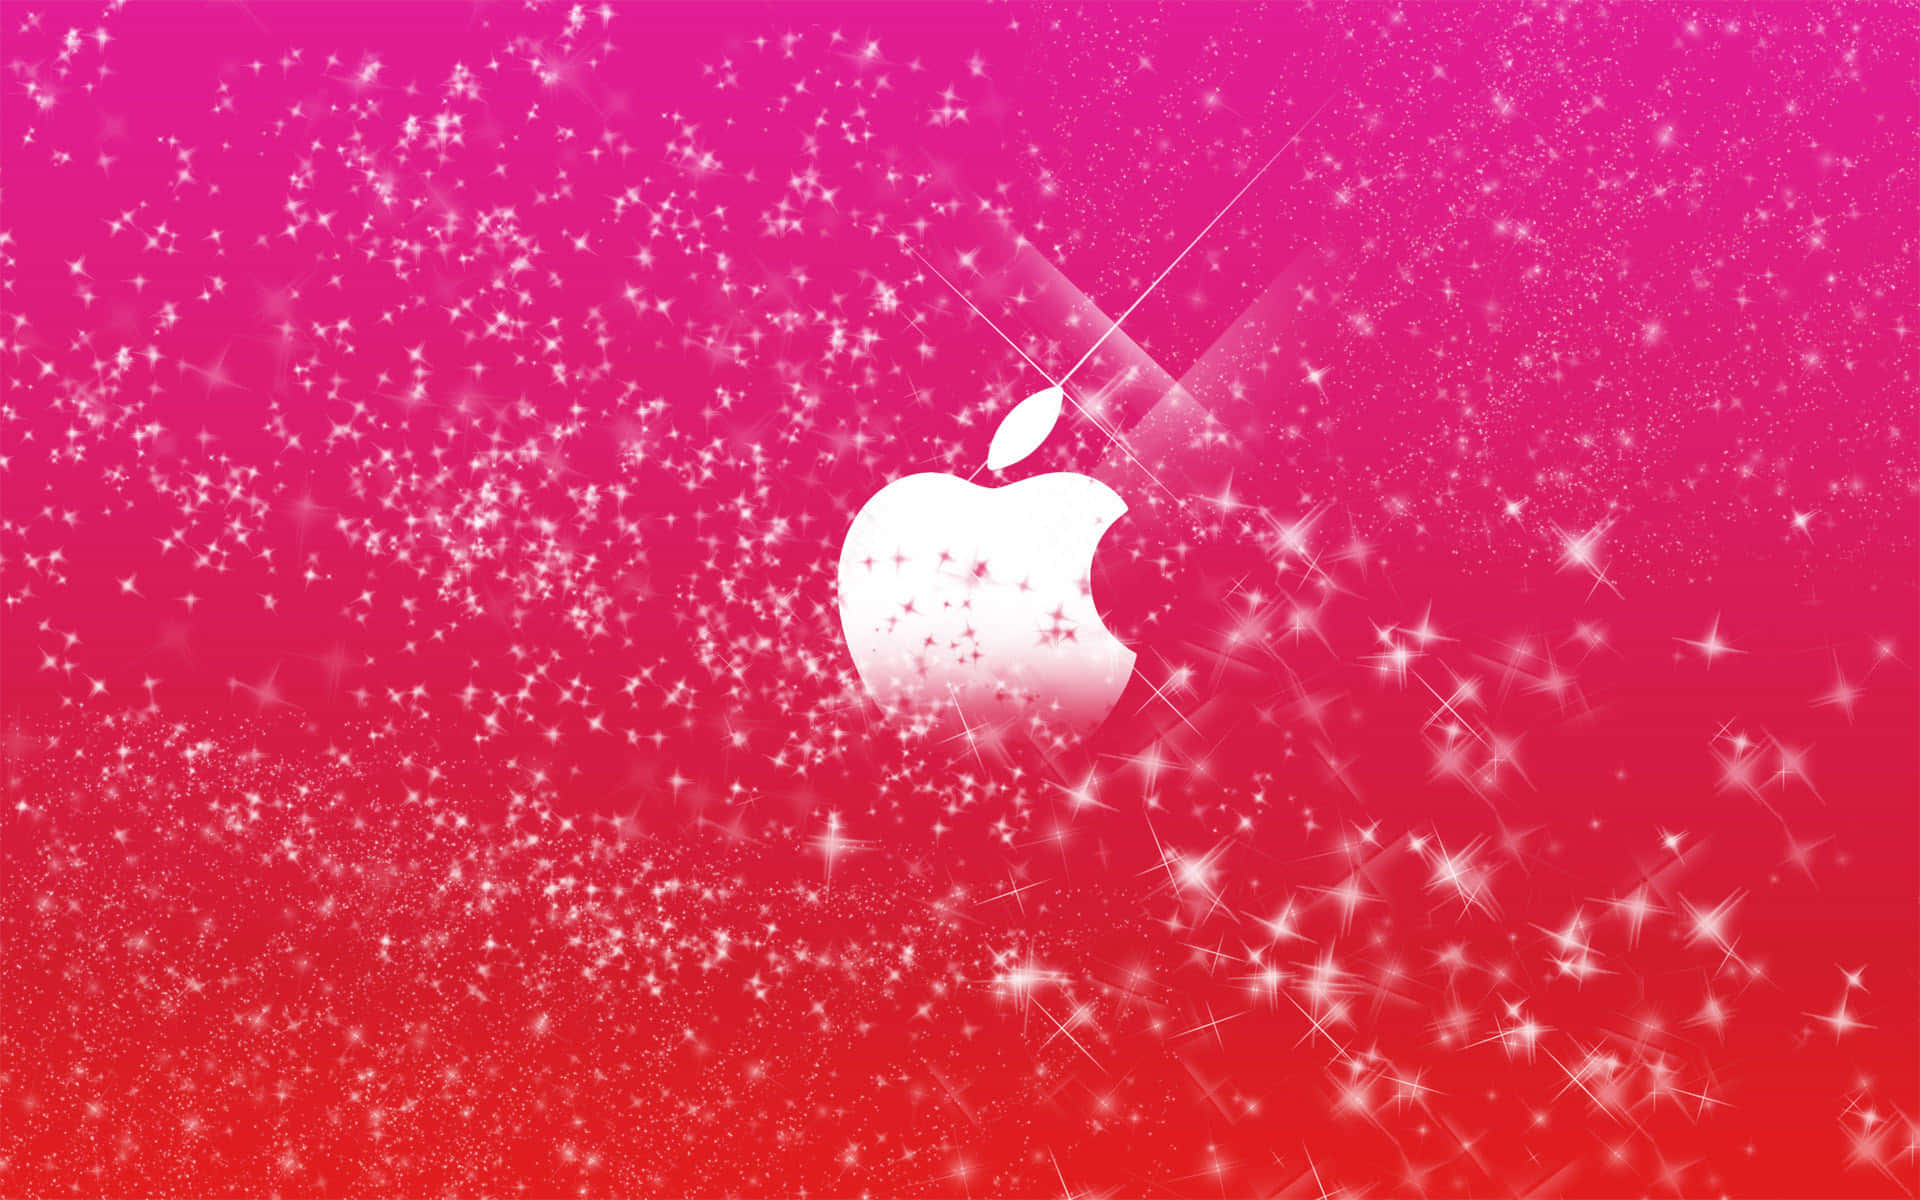 “Cool Apple – A Stylish and Refreshing Take on the Fruit" Wallpaper